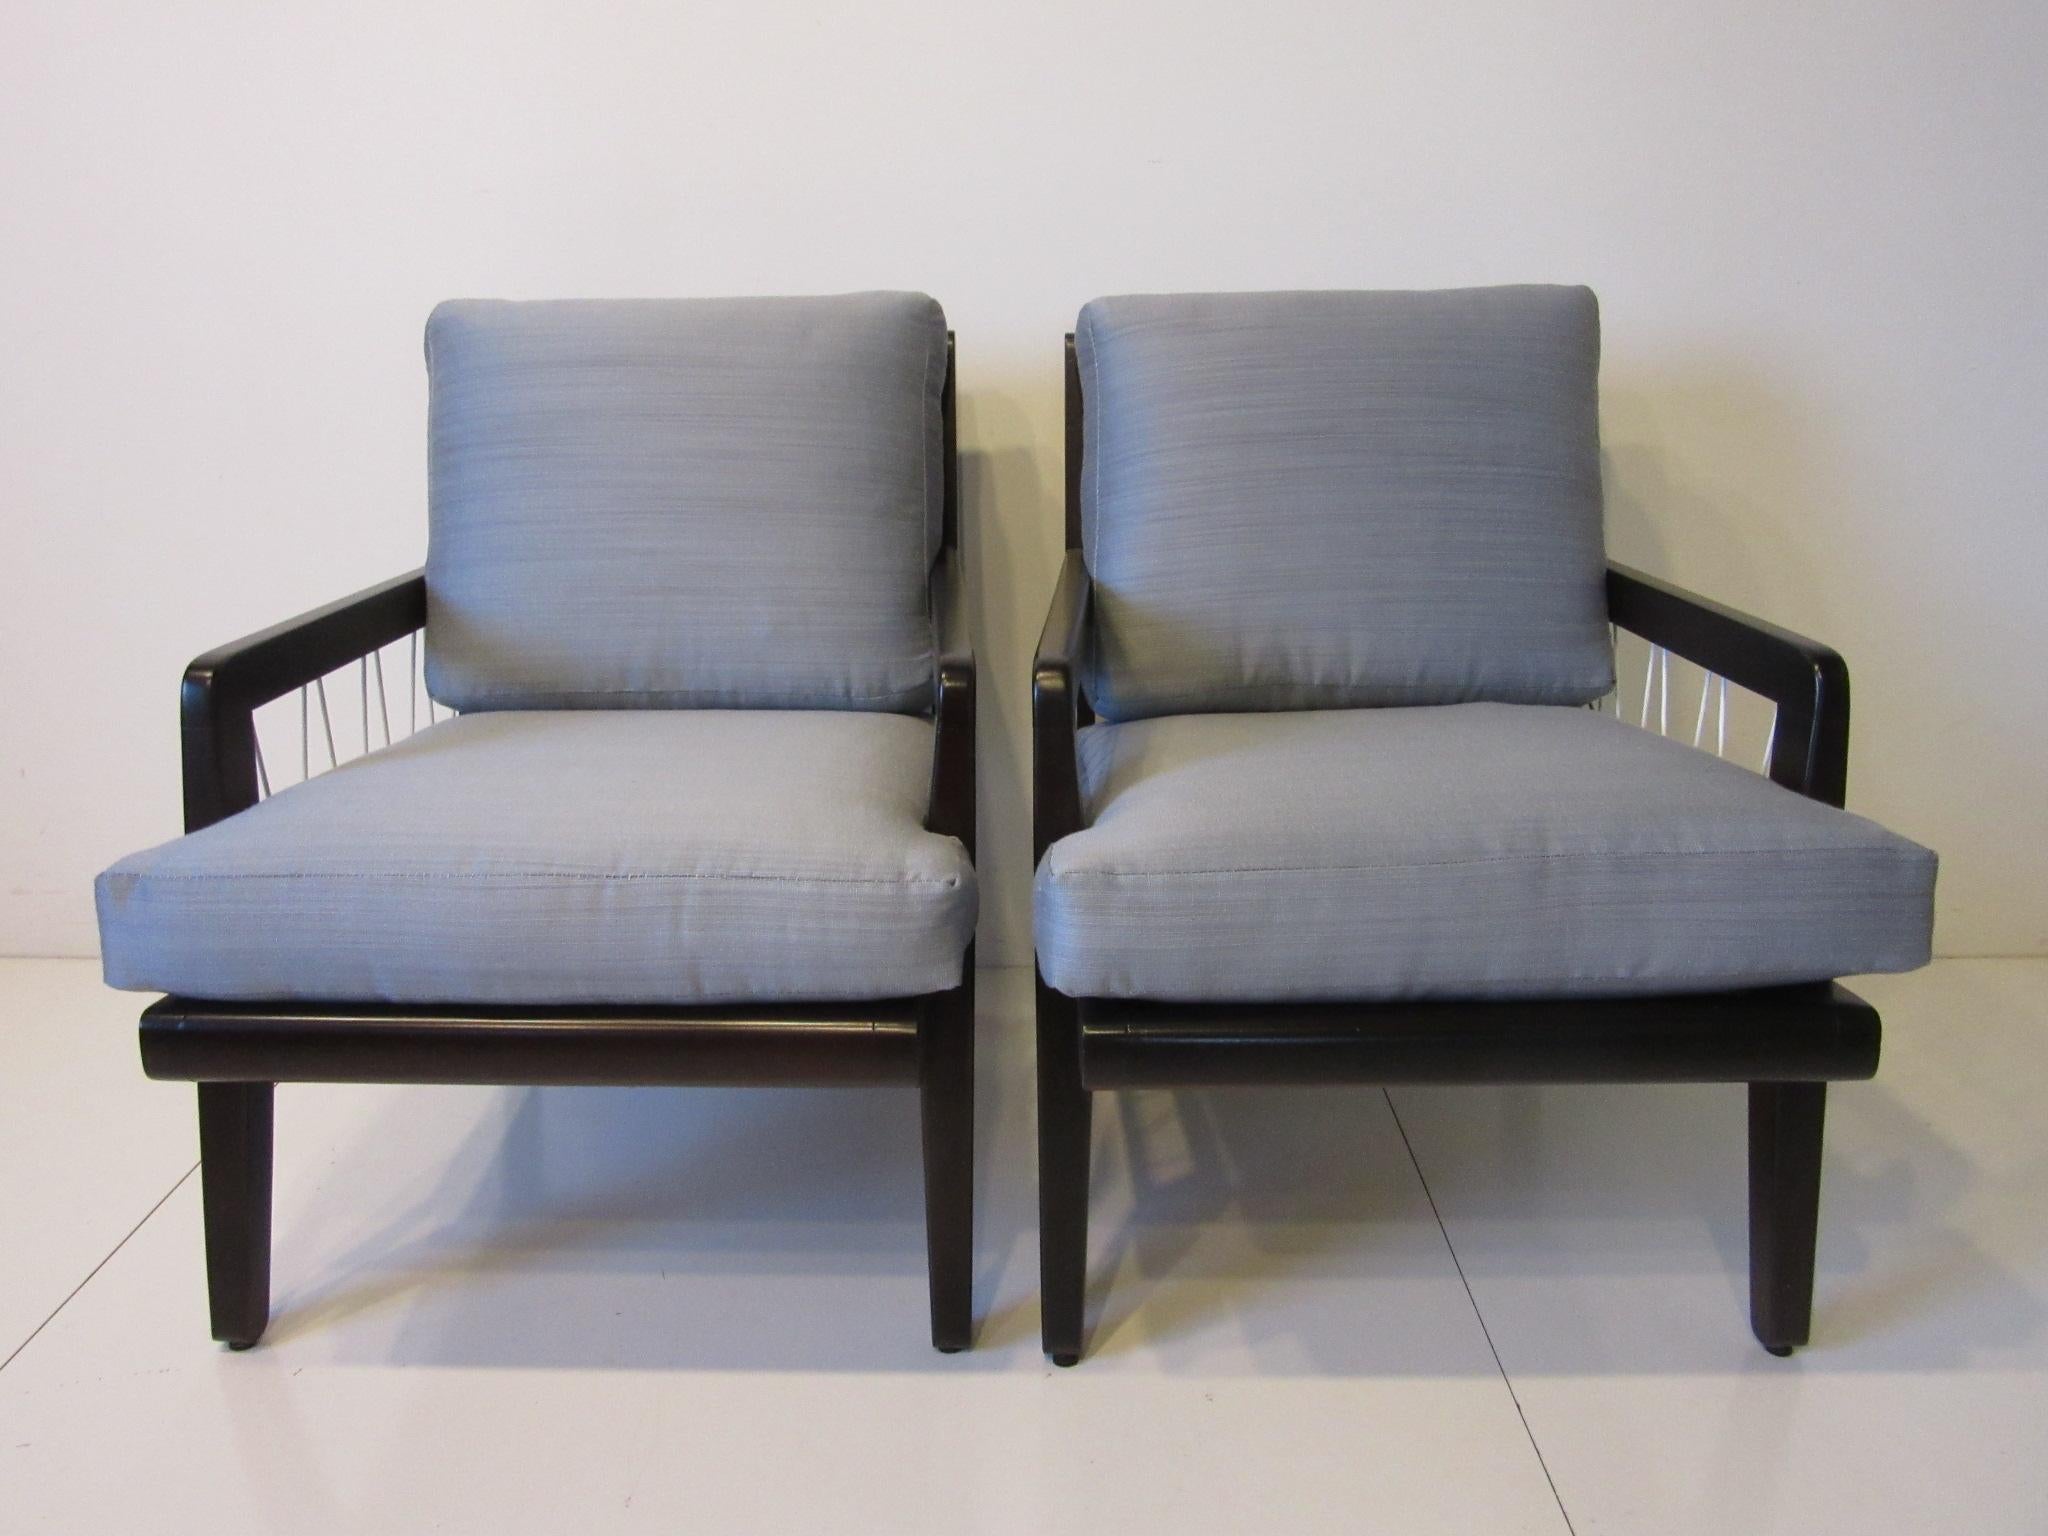 A pair of ebony toned solid wood framed lounge chairs with nylon cord design to the open arm and back areas, the two cushion chairs are upholstered in a fine soft sophisticated contract fabric with lines of lighter and darker grays. Designed for